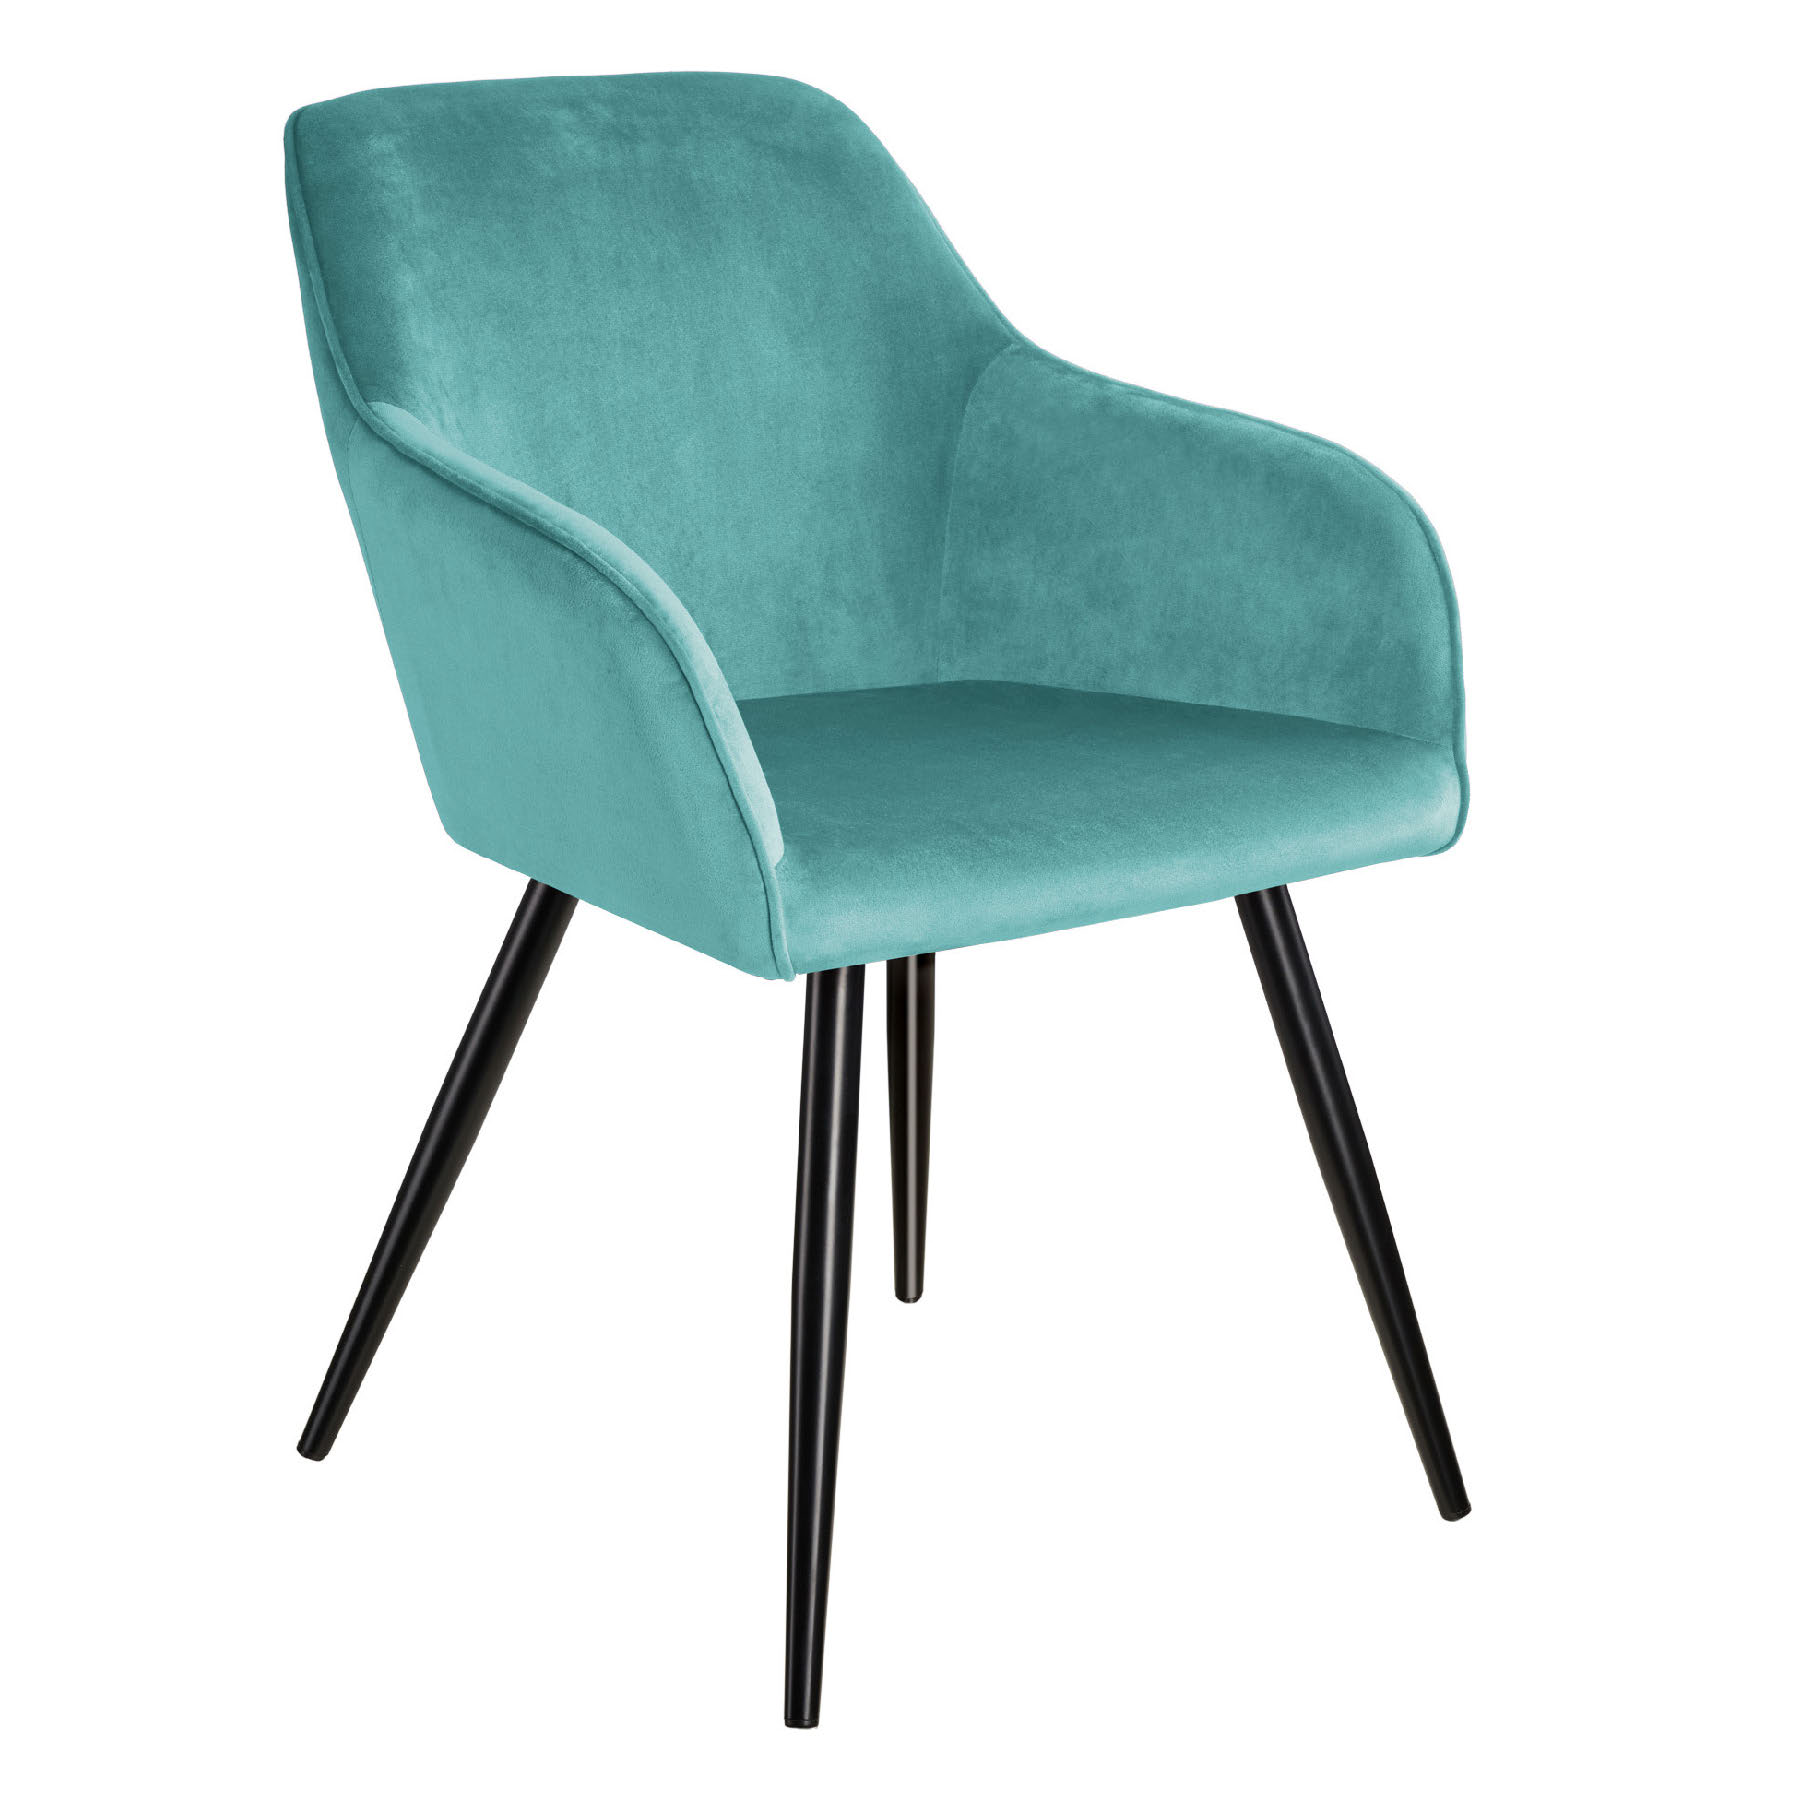 Chaise MARILYN Effet Velours Style Scandinave turquoise/noir